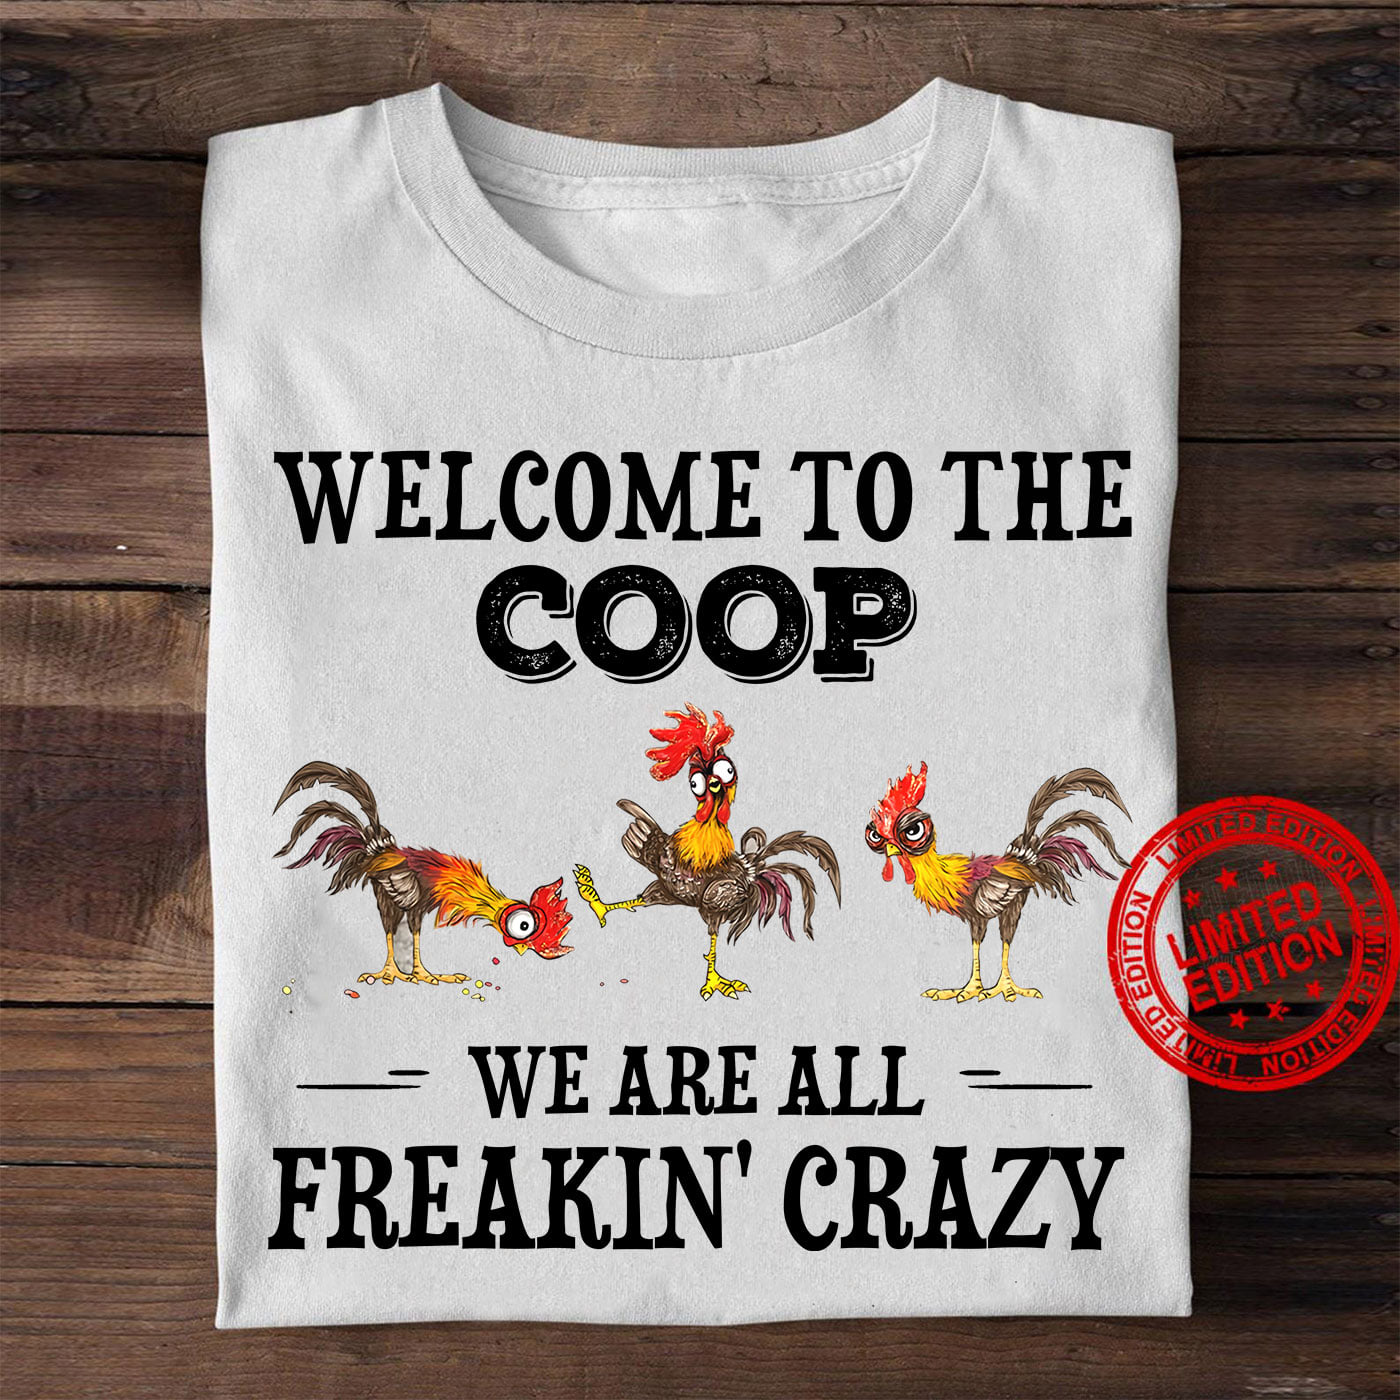 Welcome to the coop we are all freakin crazy - Grumpy chickens